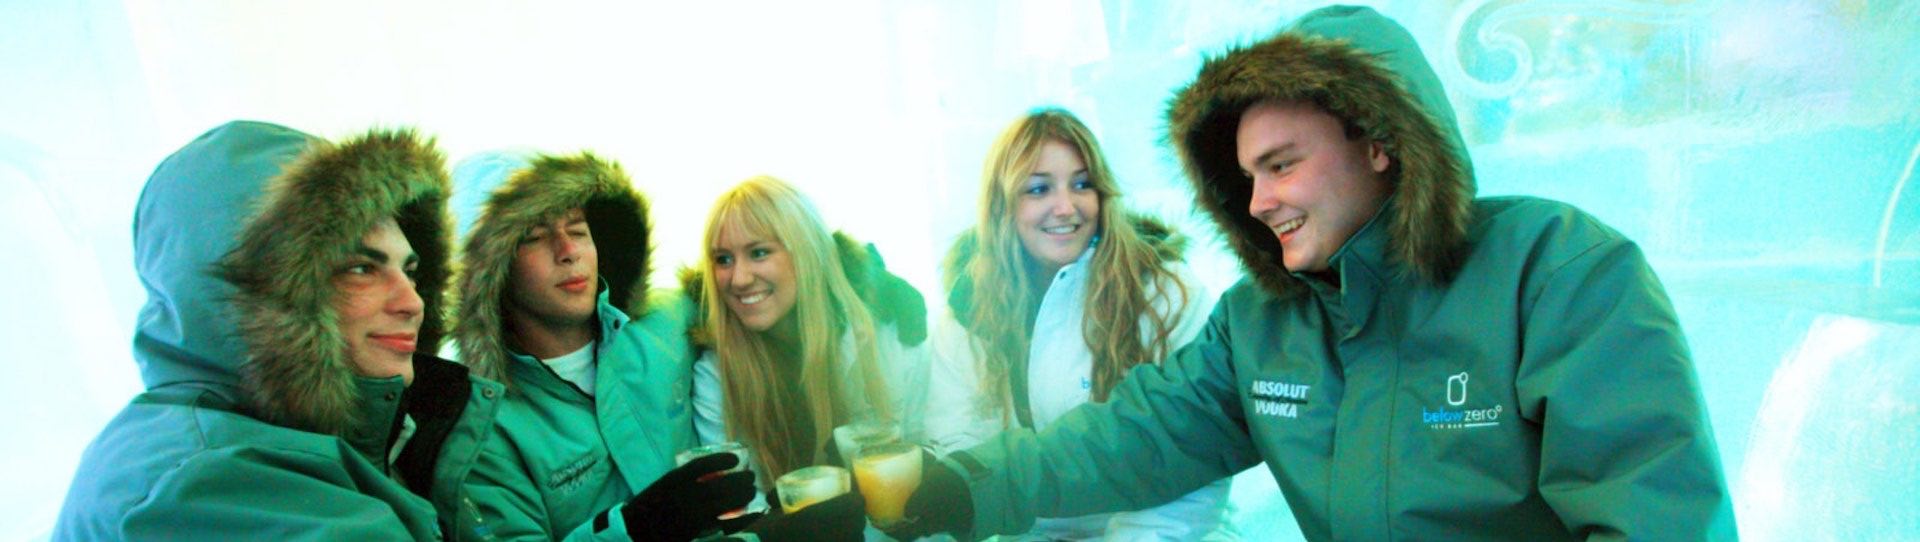 Group drinking from ice glasses at the below zero ice bar in Queenstown on friday night big night out pub crawl